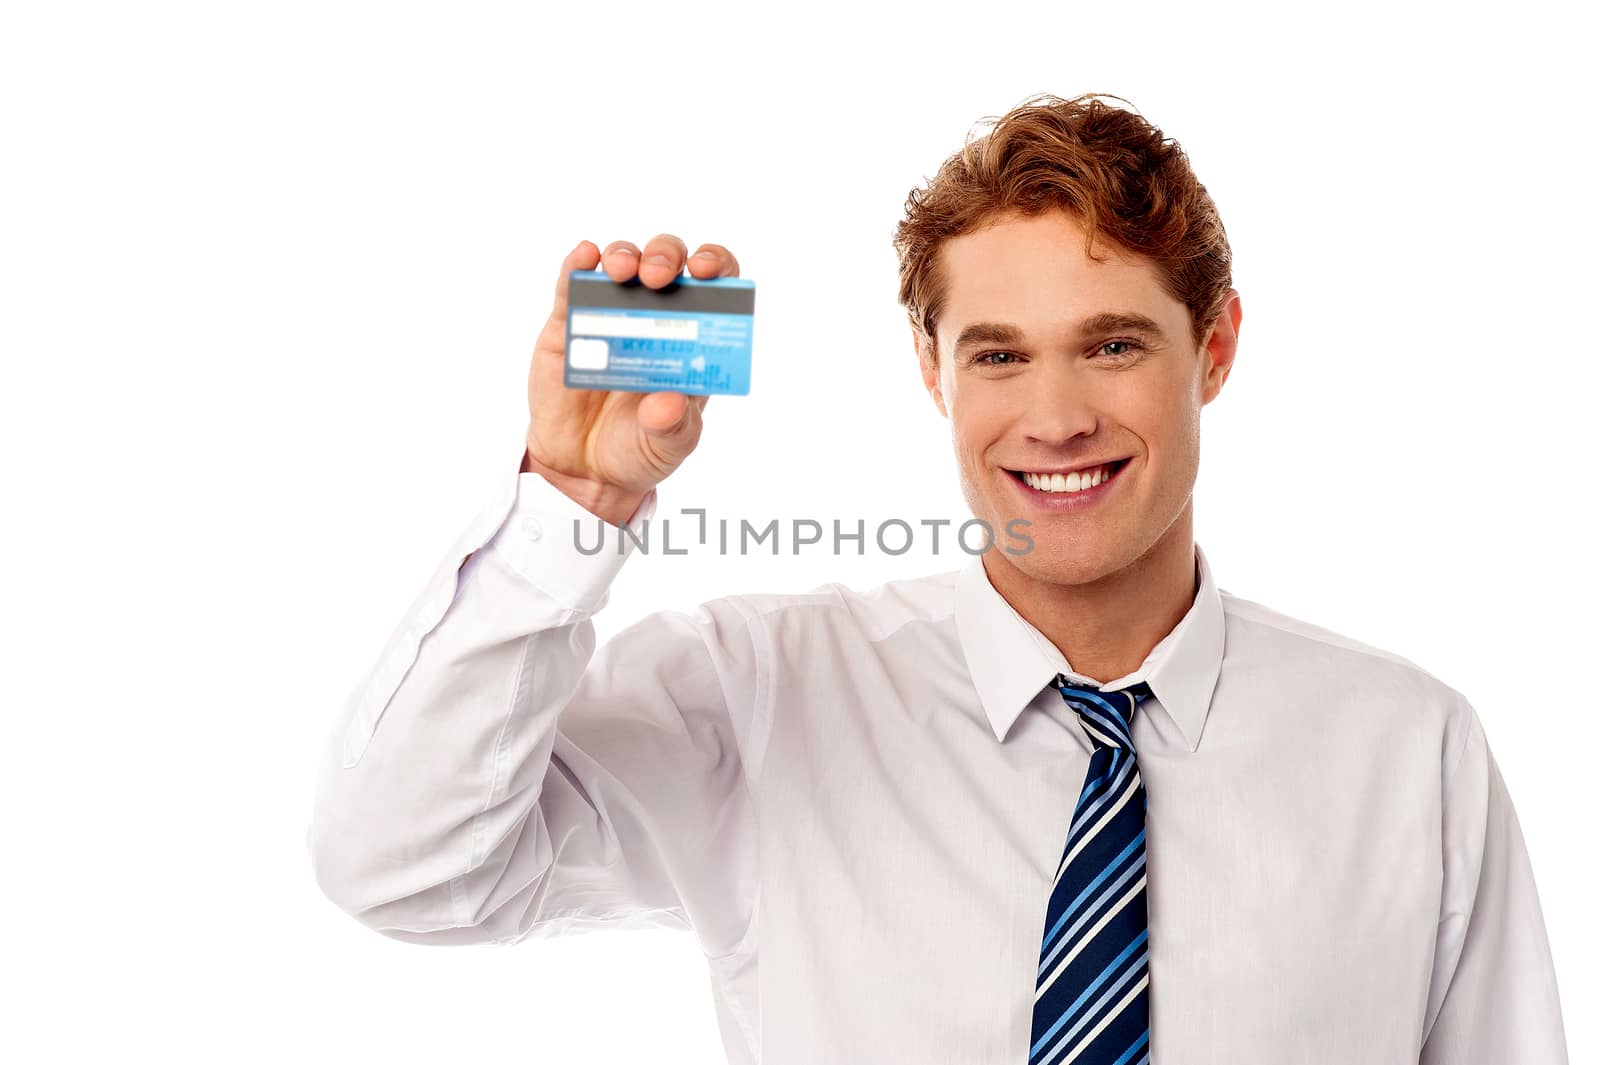 Smiling male executive showing new credit card